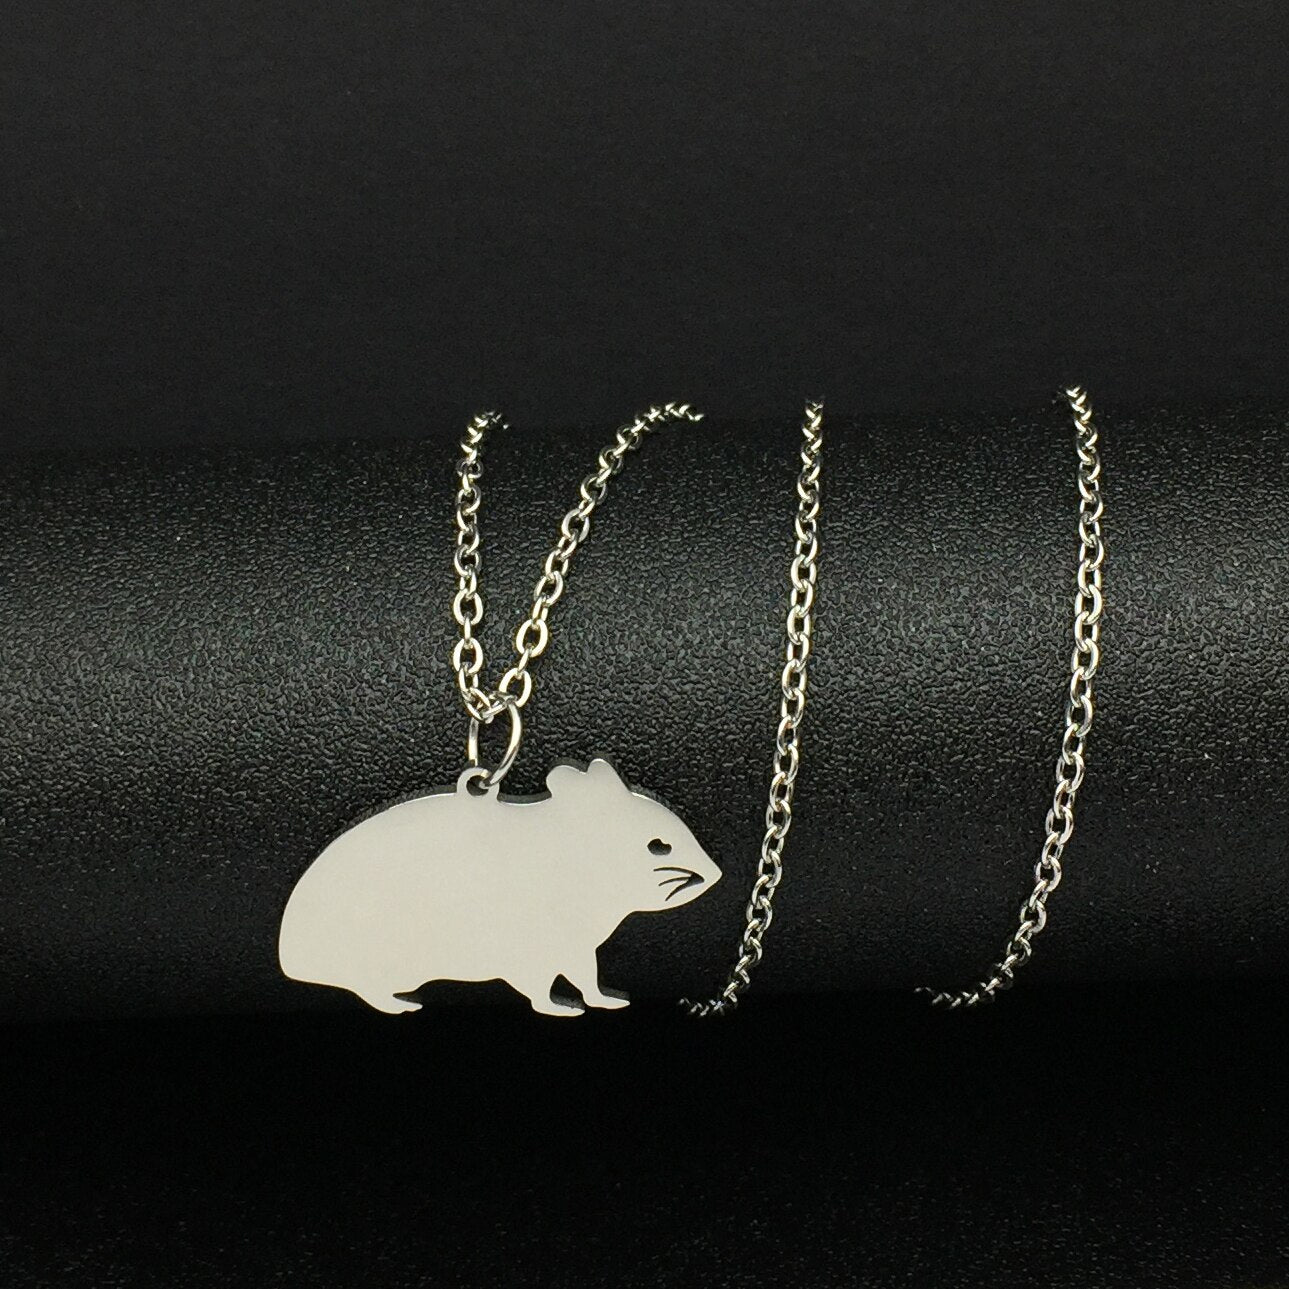 Personalized Hamster necklace - Style's Bug Silver